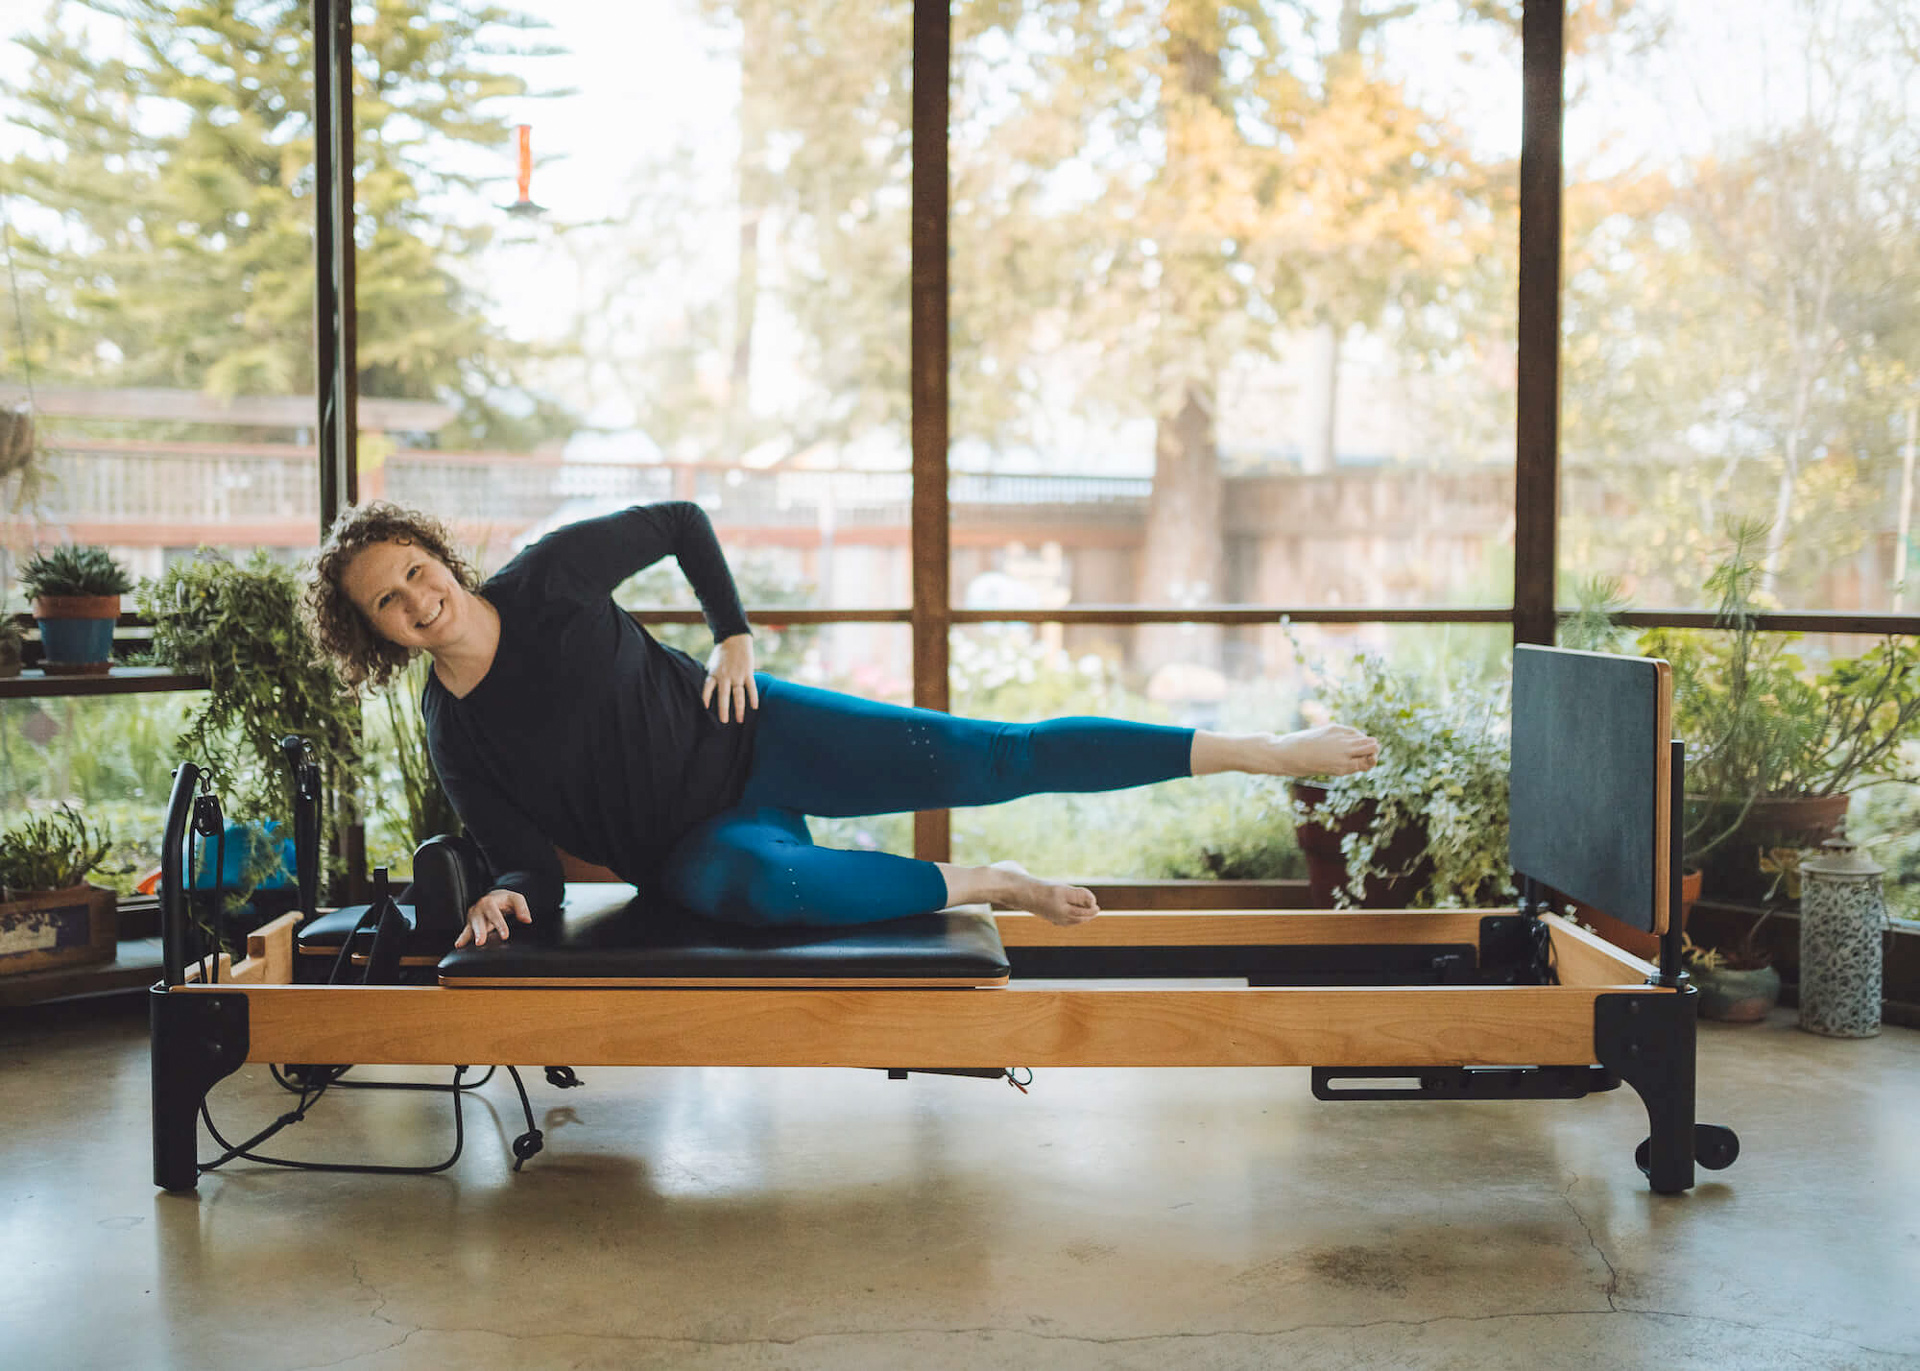 Wearing teal and black workout gear, Kaleen Canevari demonstrates a Pilates move on the Flexia exercise machine she brought to the market with help from Sac State’s Carlsen Center for Innovation and Entrepreneurship.